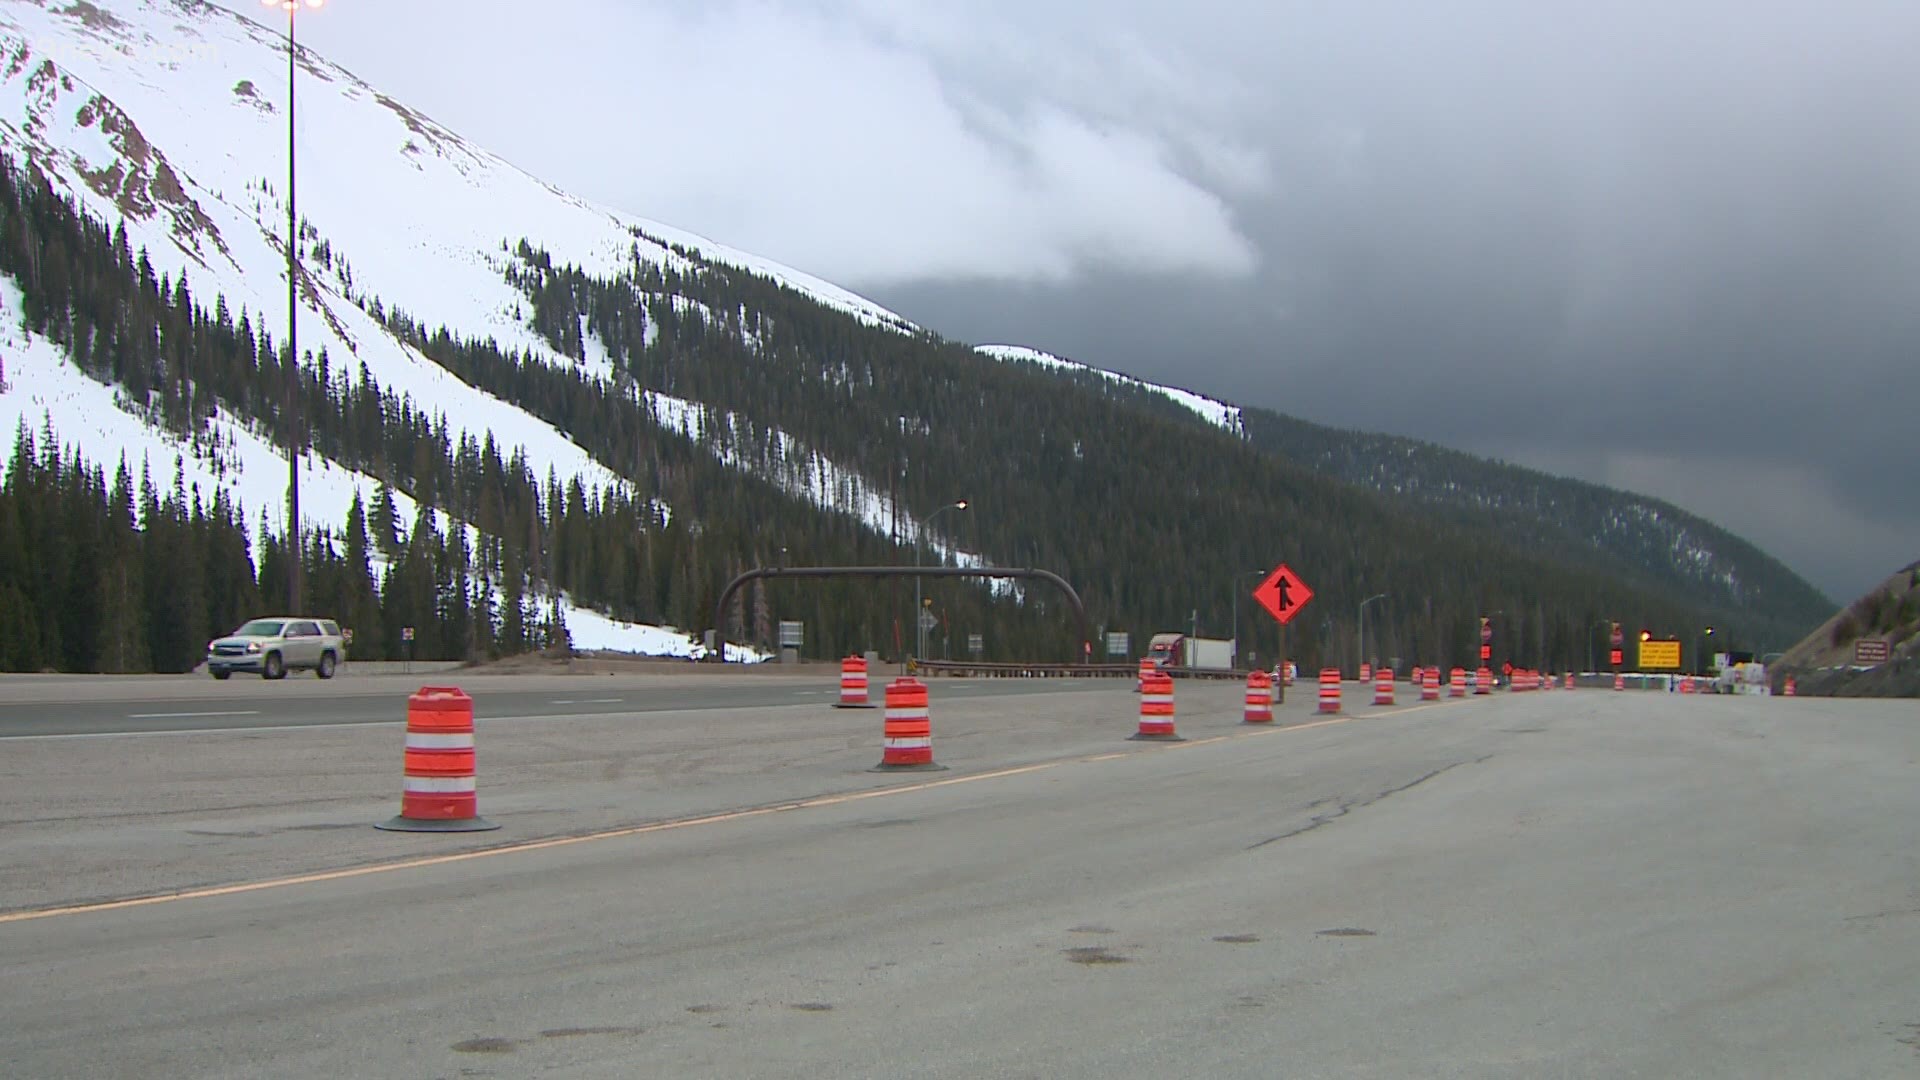 Closures were in place on either side of the tunnel, CDOT said.